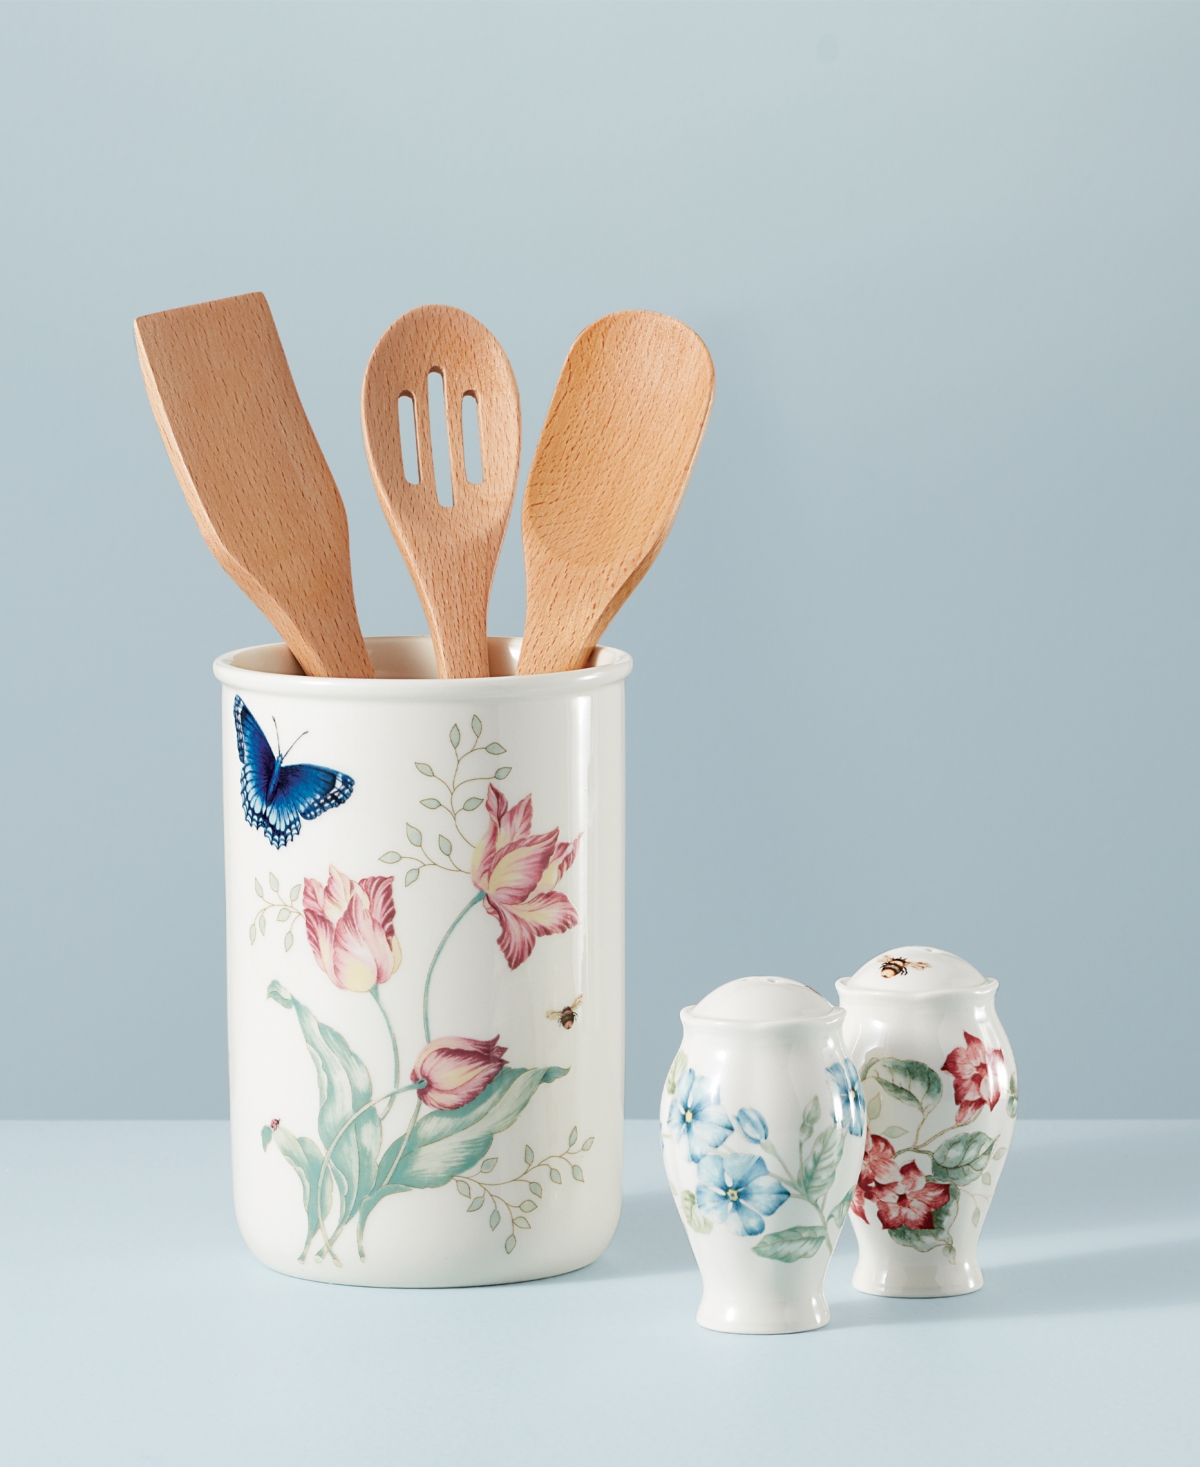 Shop Lenox Butterfly Meadow Kitchen Jar With Utensils, Created For Macy's In White Body W,pastel Floral And Botanical